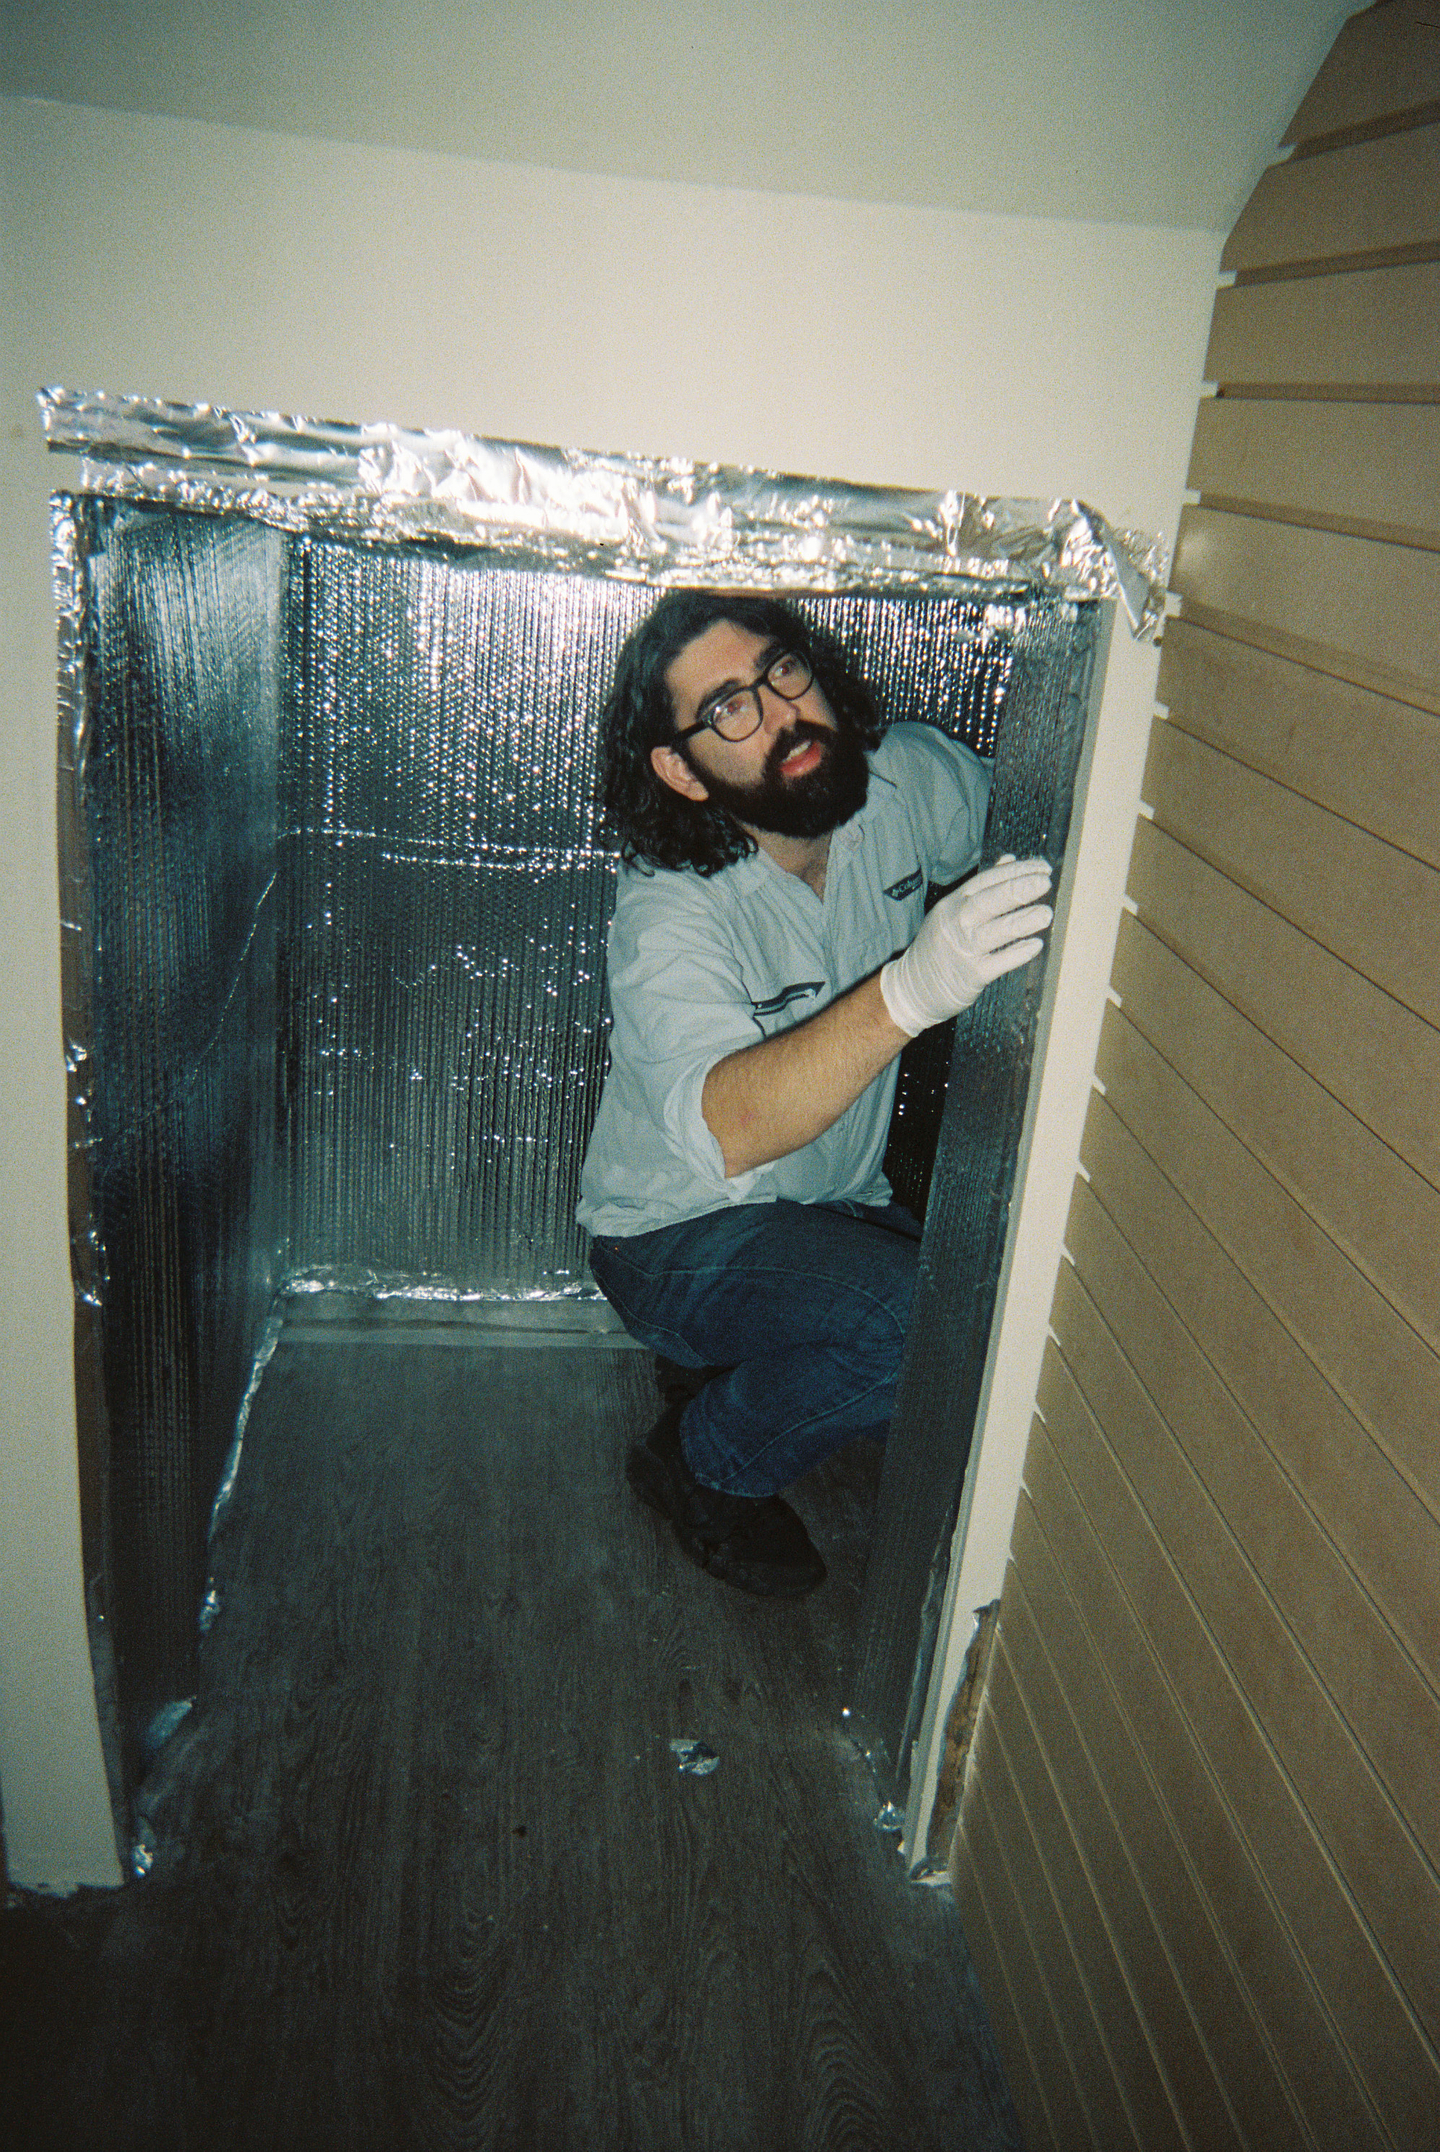 Sol Hashemi kneels in a small closet space with walls covered in silver-coloured reflective insulation. He wears a light blue shirt with dark blue jeans and a white glove on his hand.